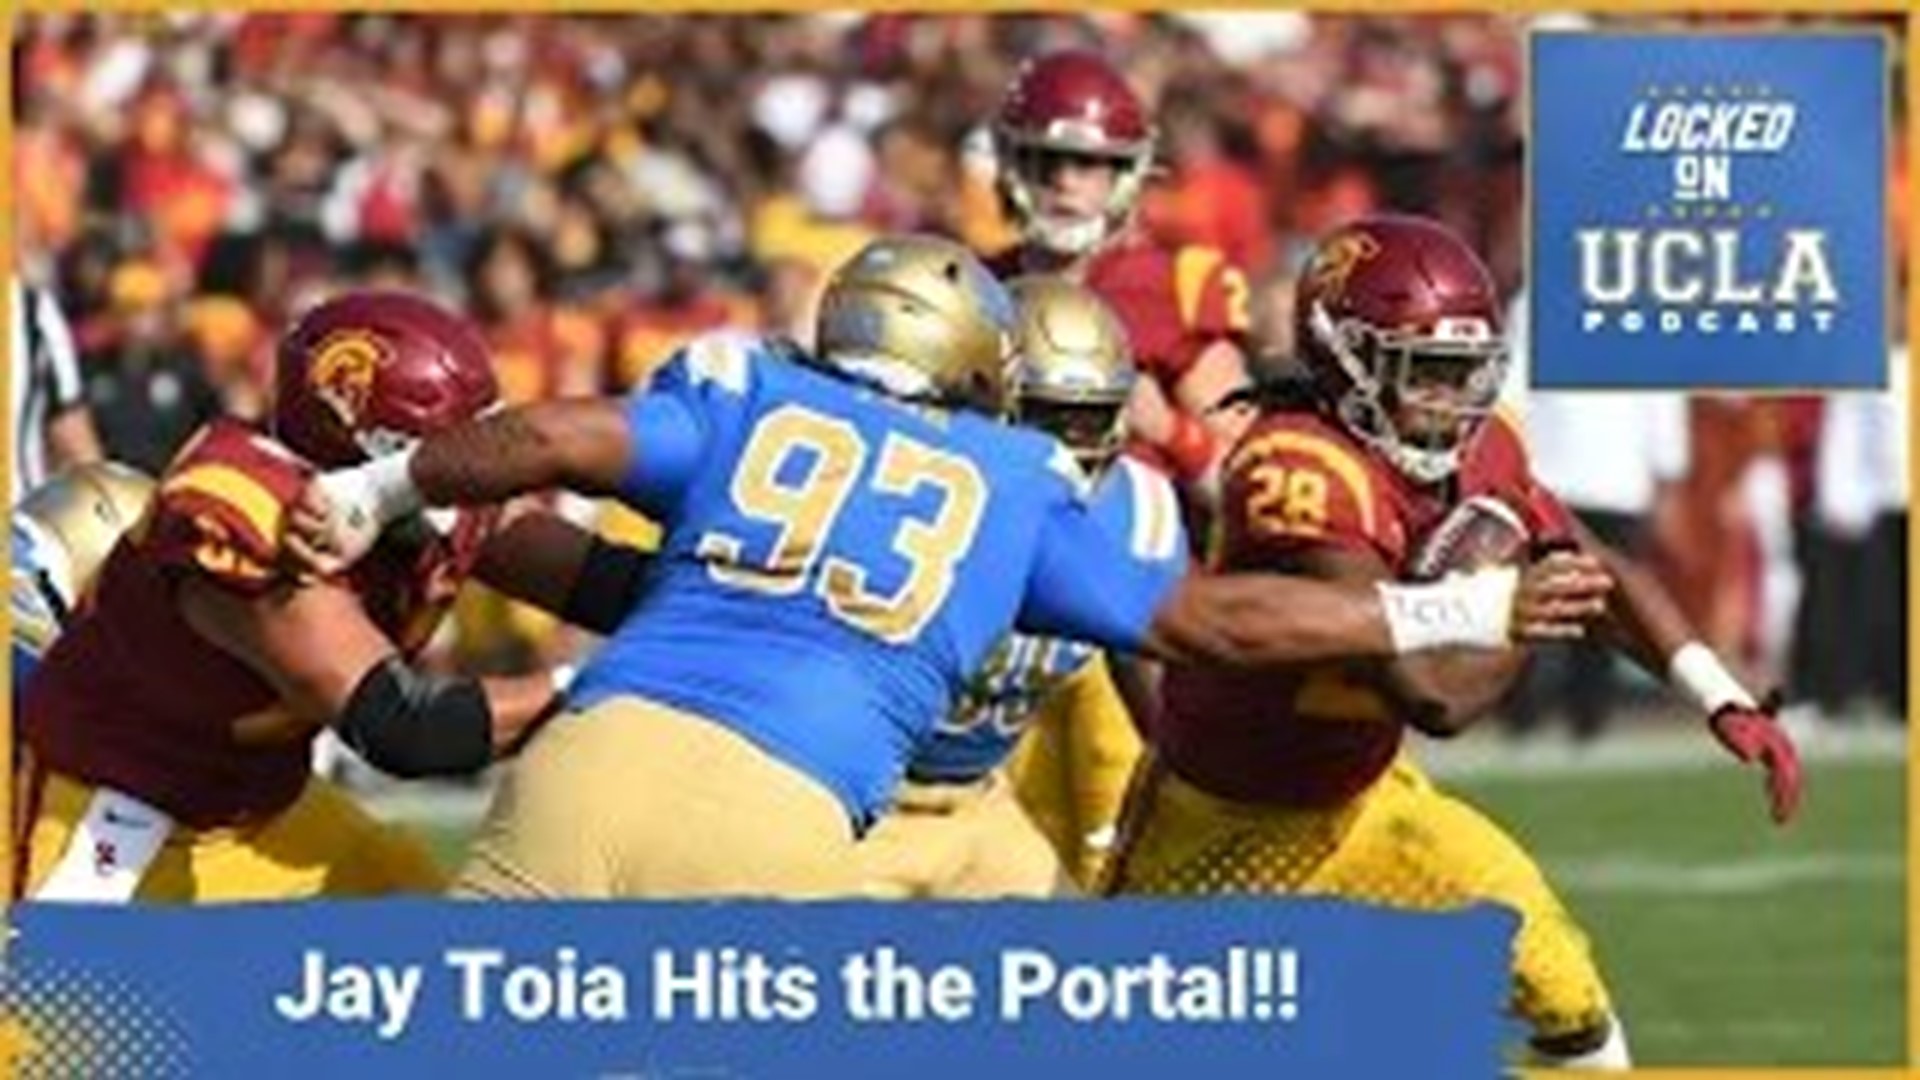 DeShaun Foster's focus for UCLA Football has shifted to the Transfer Portal as the Bruins injuries have piled up after three ACL tears and another DL hits the portal